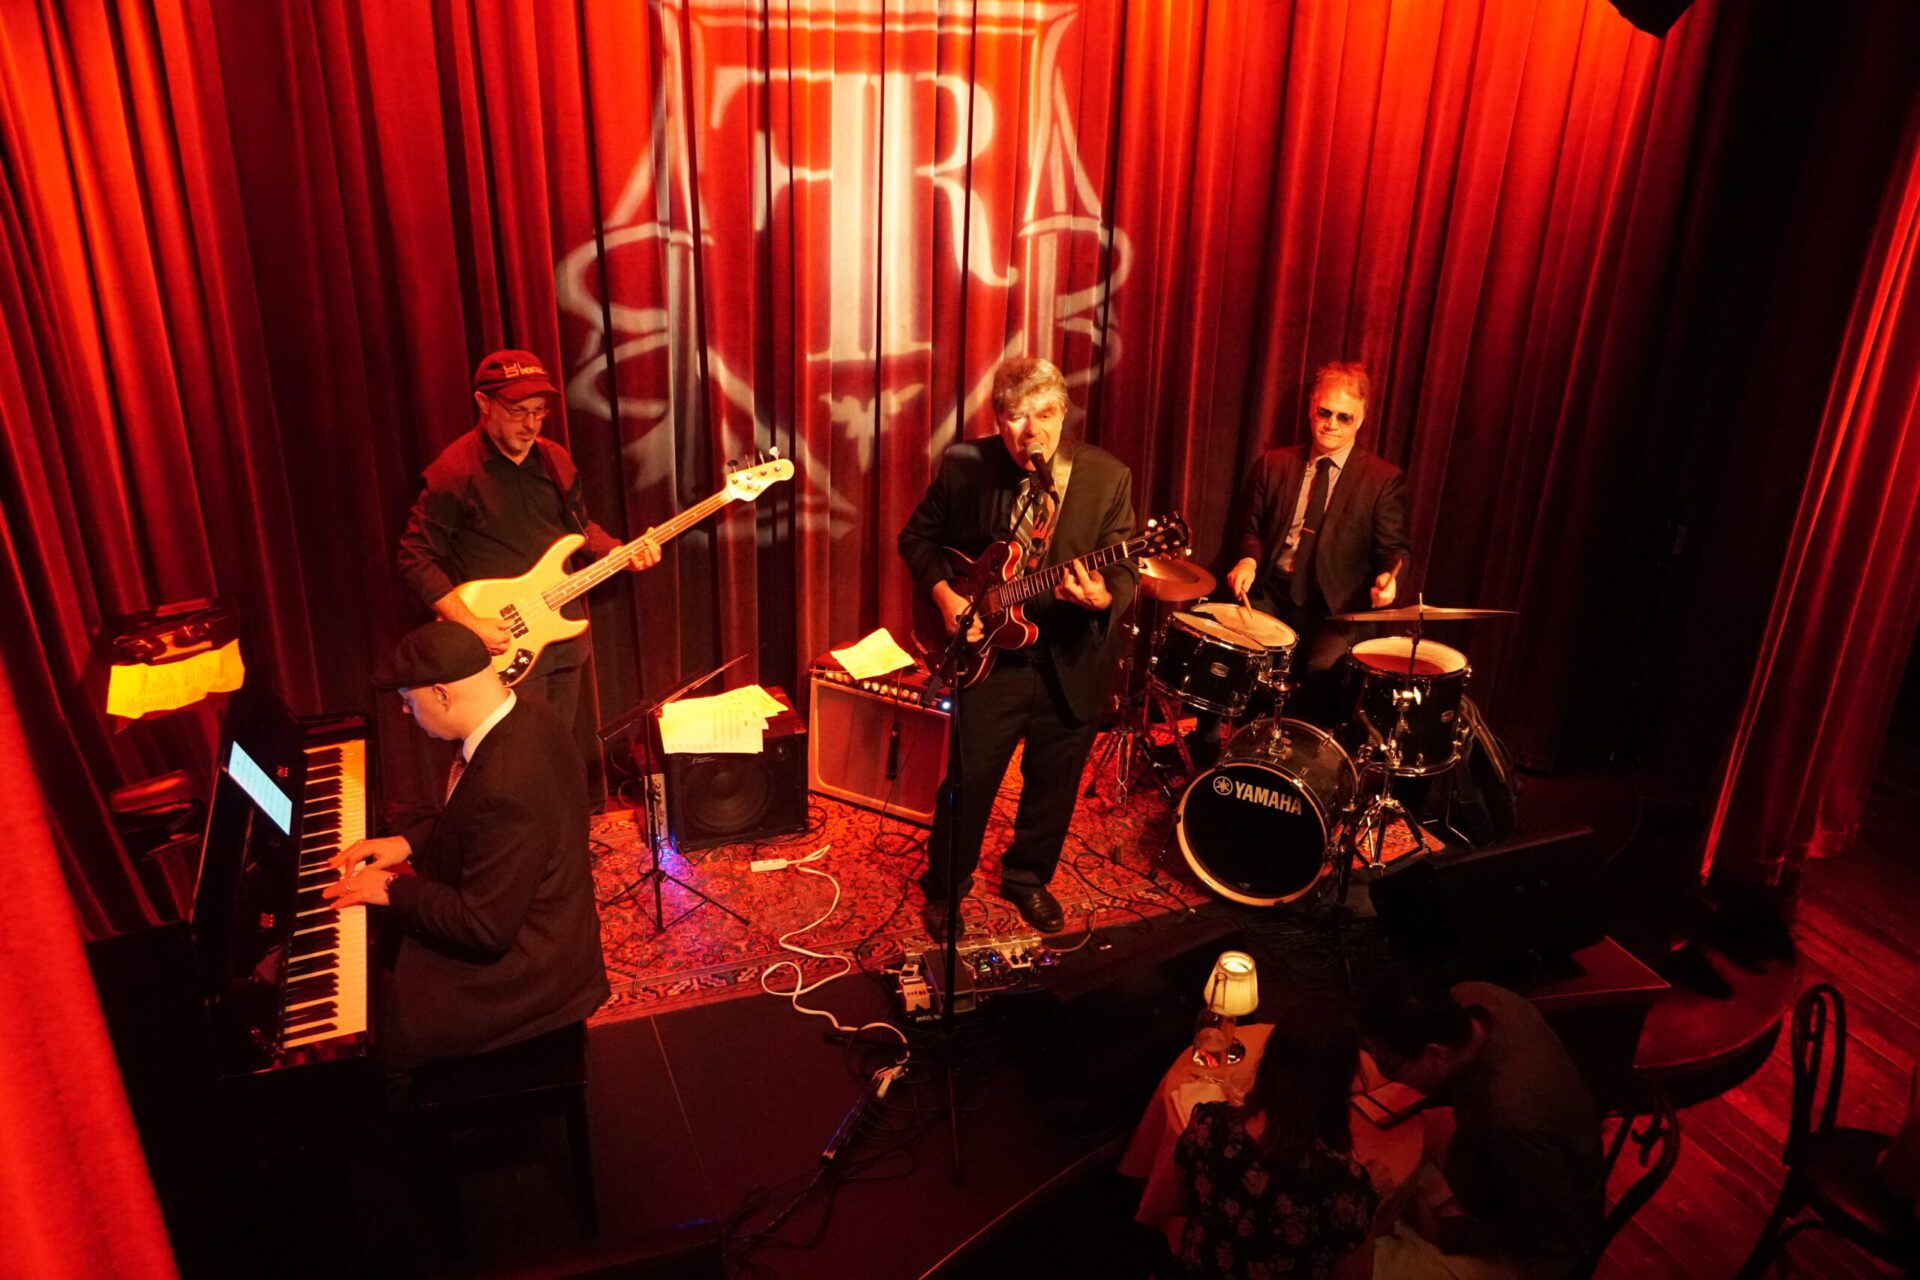 The Blicker Blues Band 7:00 pm - 11:00 pm